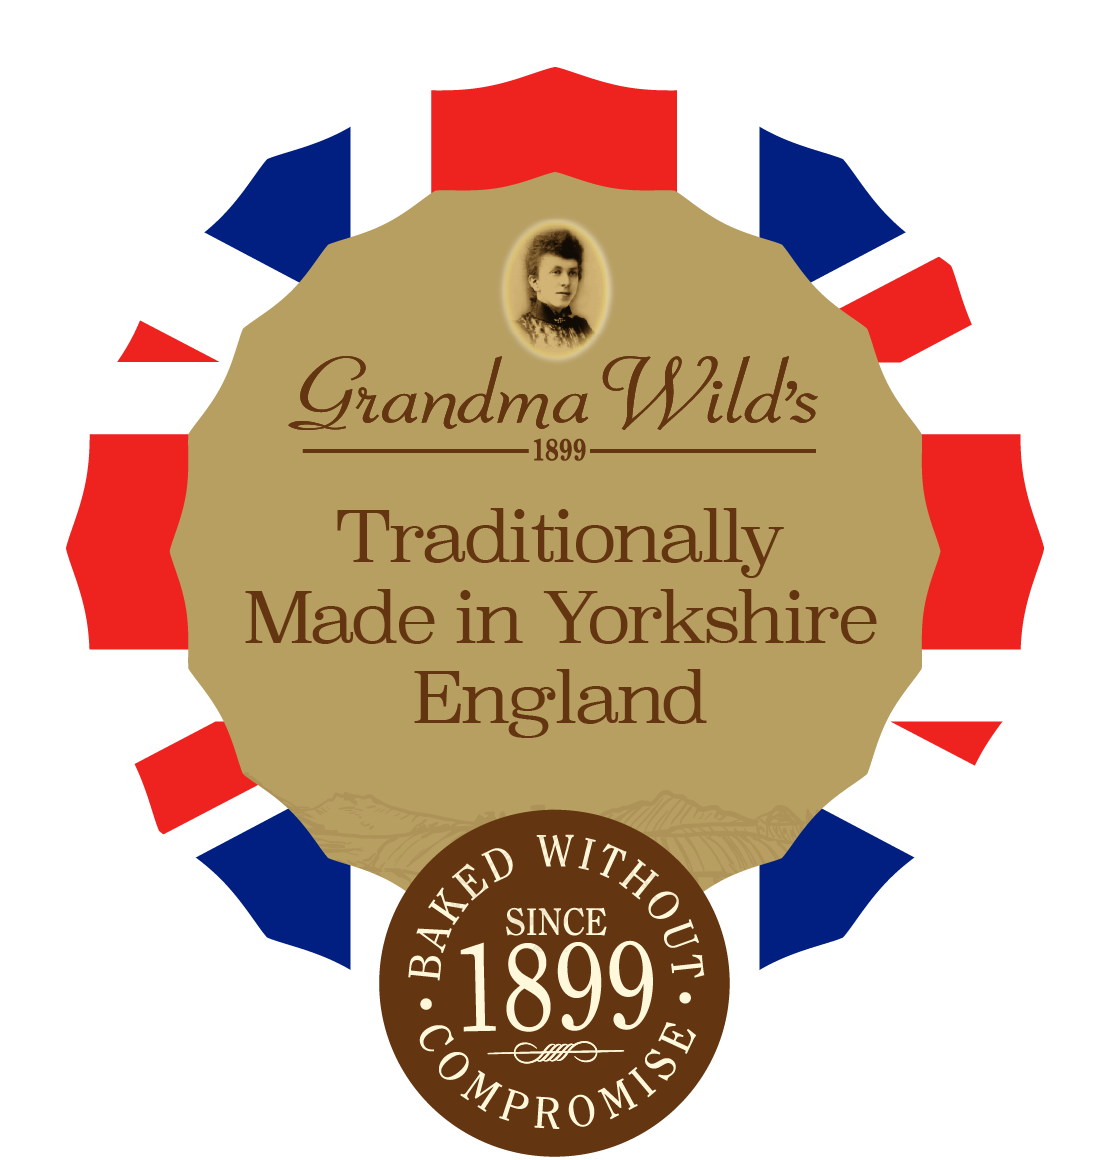 Traditionally made in Yorkshire, England